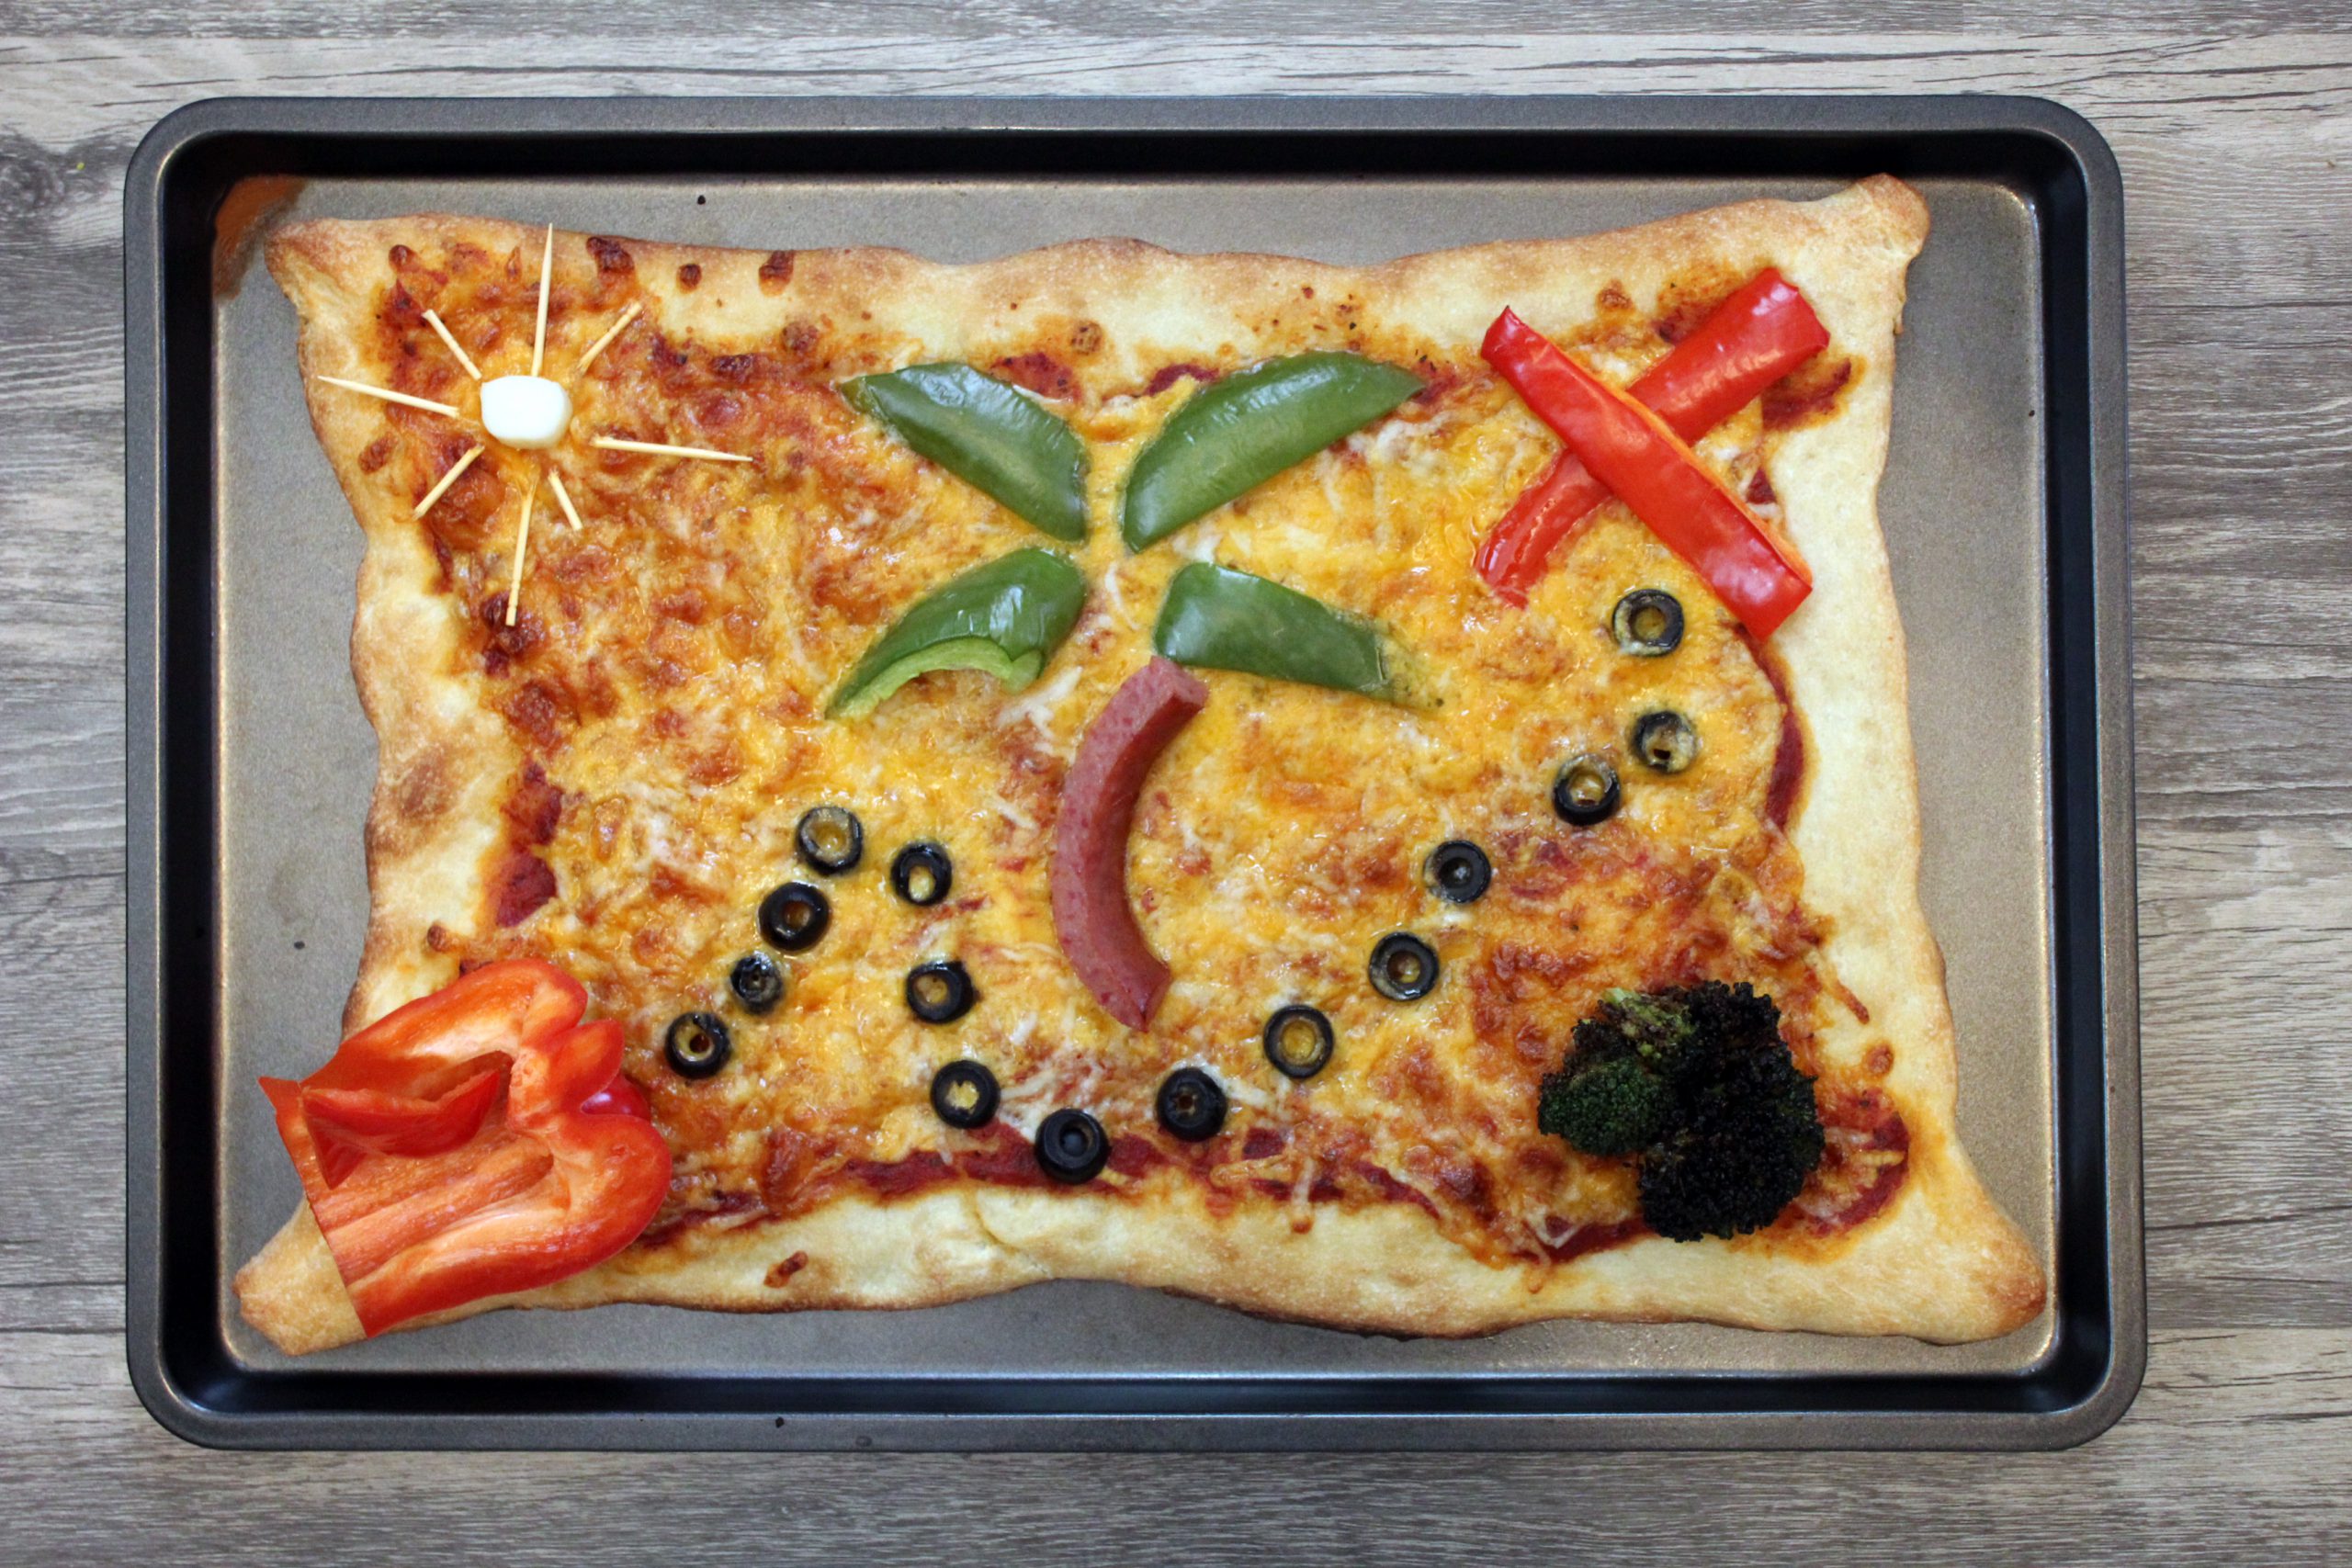 A pizza decorated to look like a treasure map